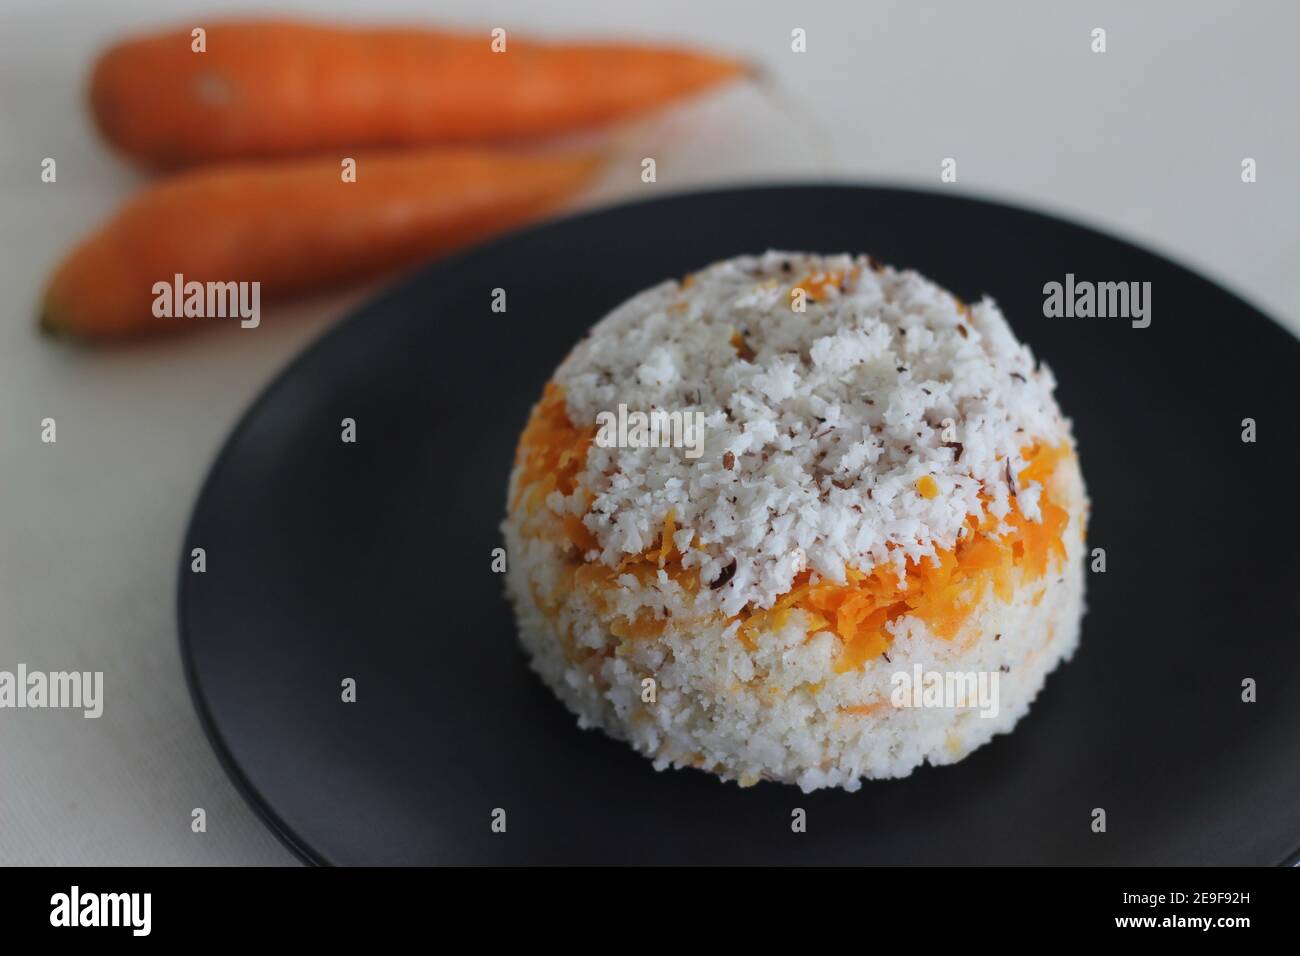 Carrot puttu. A variety of Kerala rice steam cake by adding shredded carrots along with rice flour and shredded coconut mixture Stock Photo